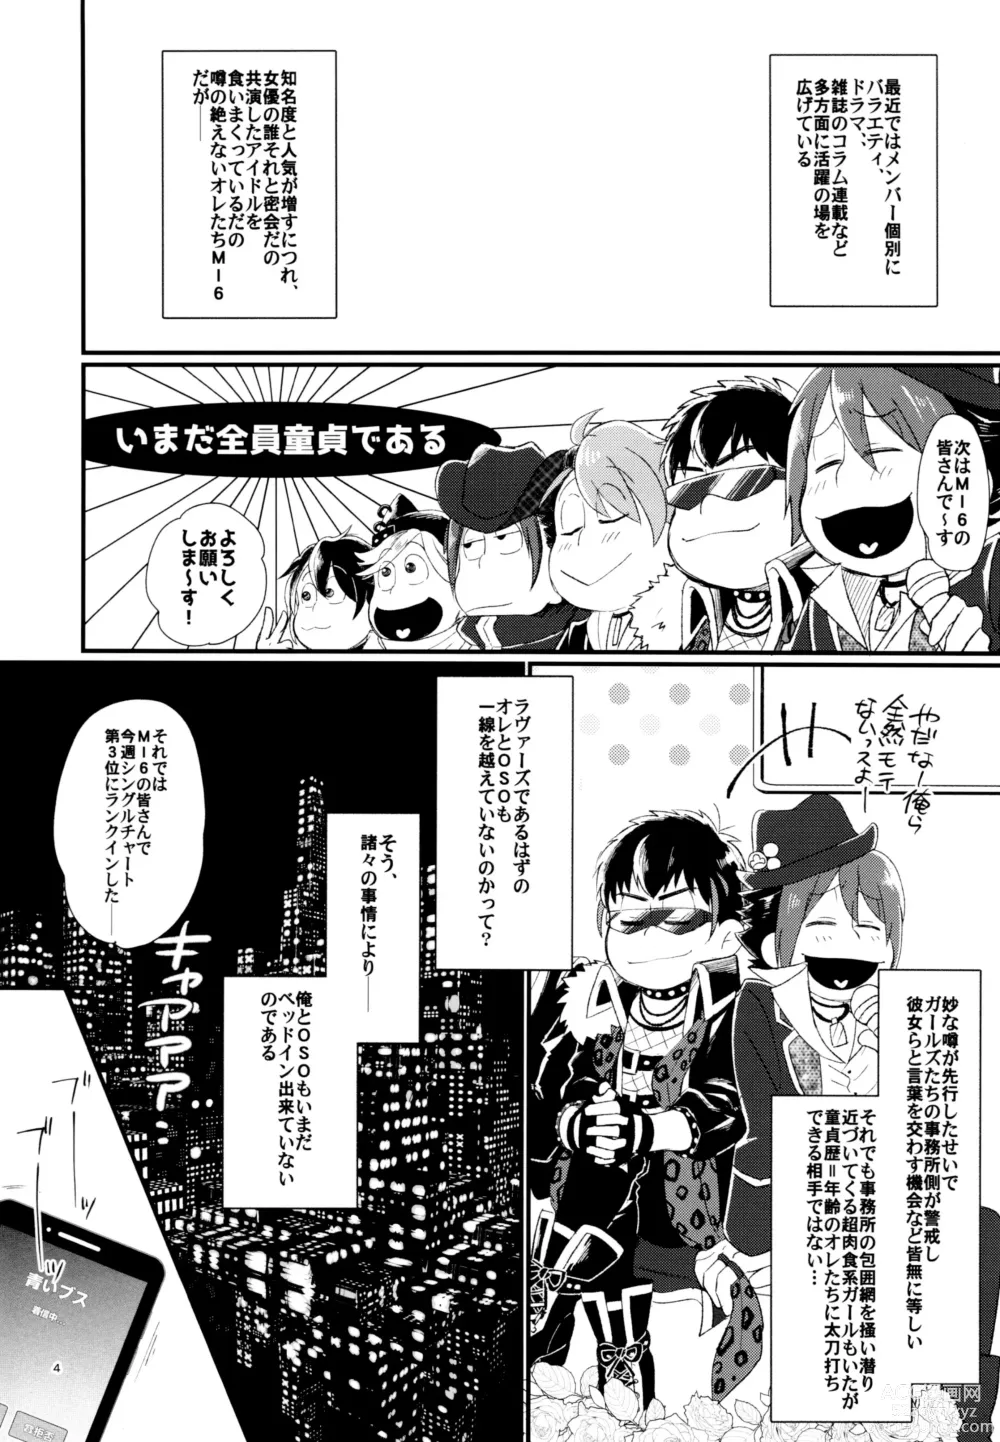 Page 4 of doujinshi A book where OSO seals away the pain of Kara and graduates from virginity.